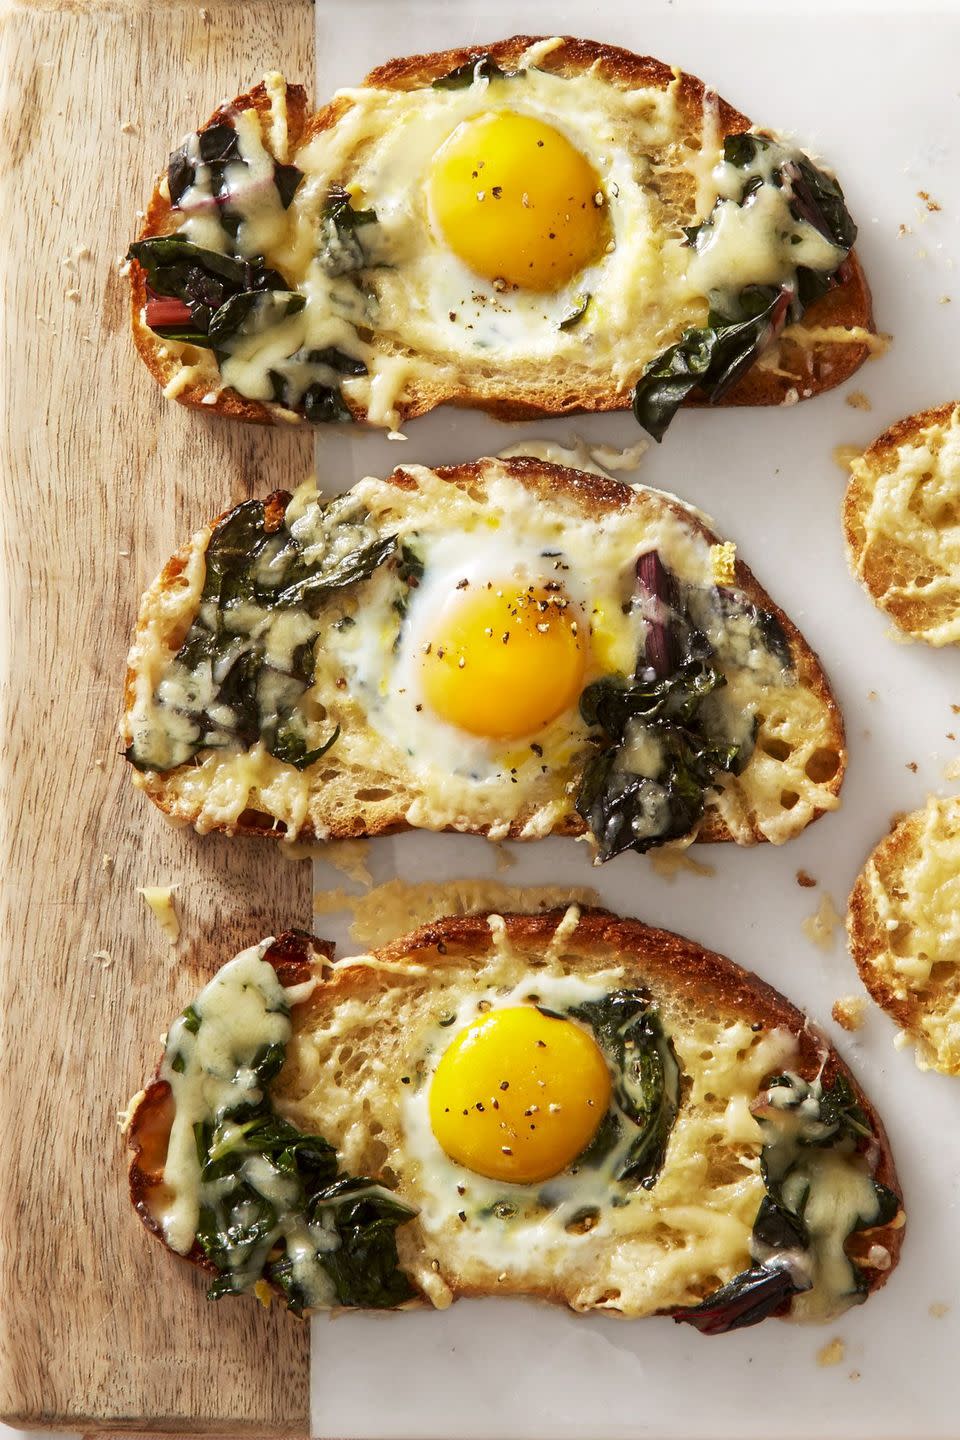 24) Chard and Gruyère Eggs in the Hole